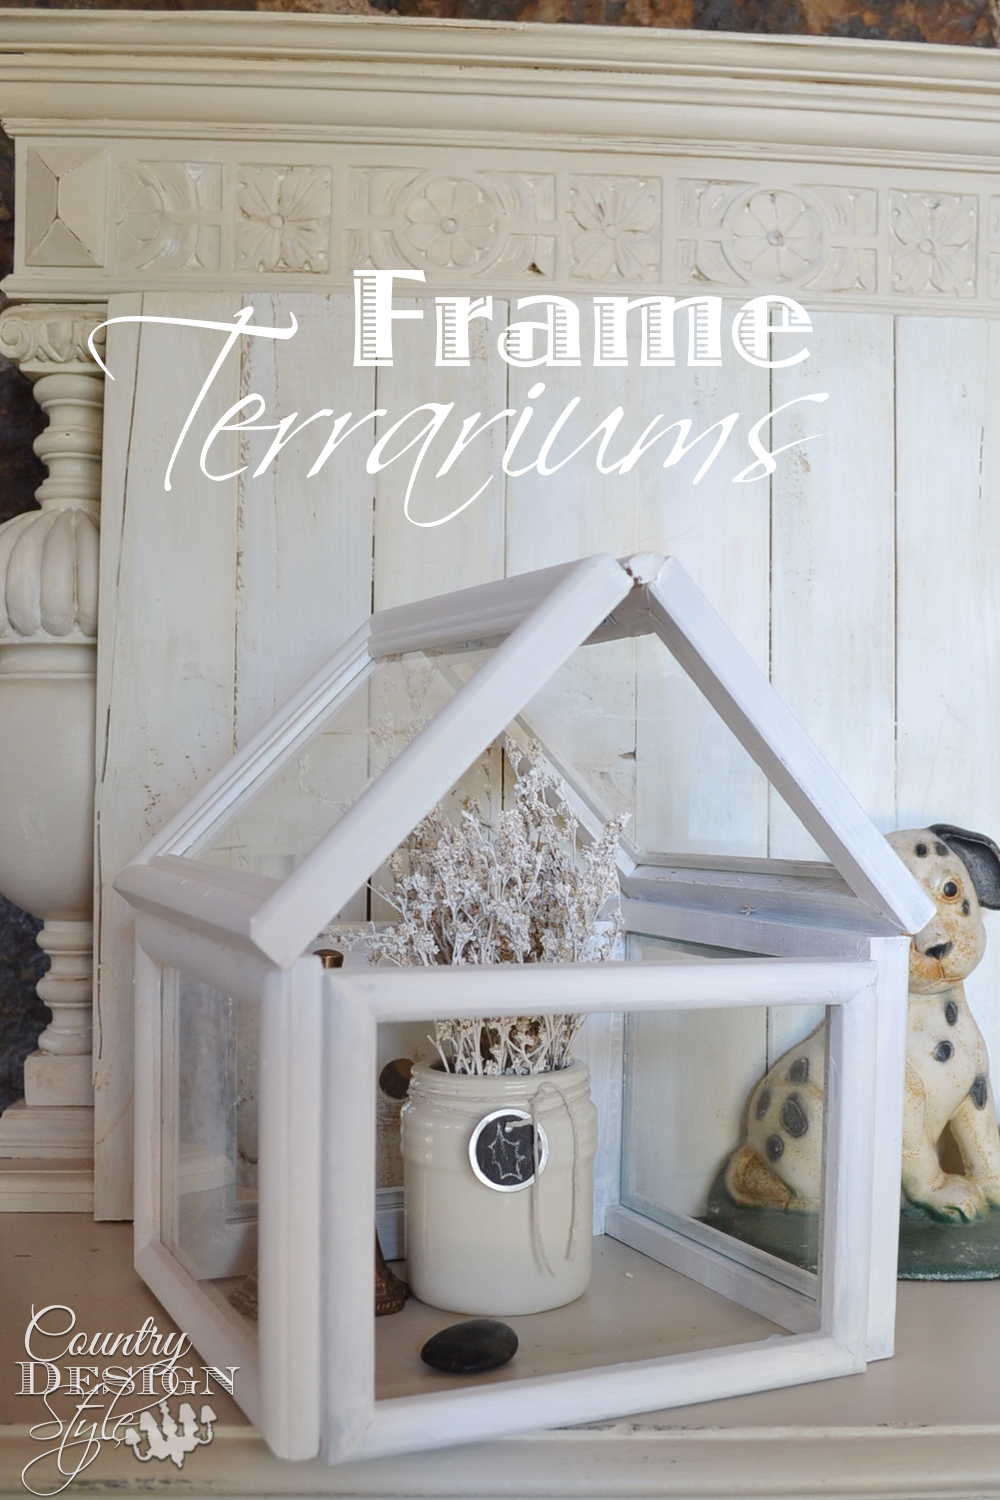 Easy step by step DIY how to make a terrarium using thrift store frames. Country Design Style